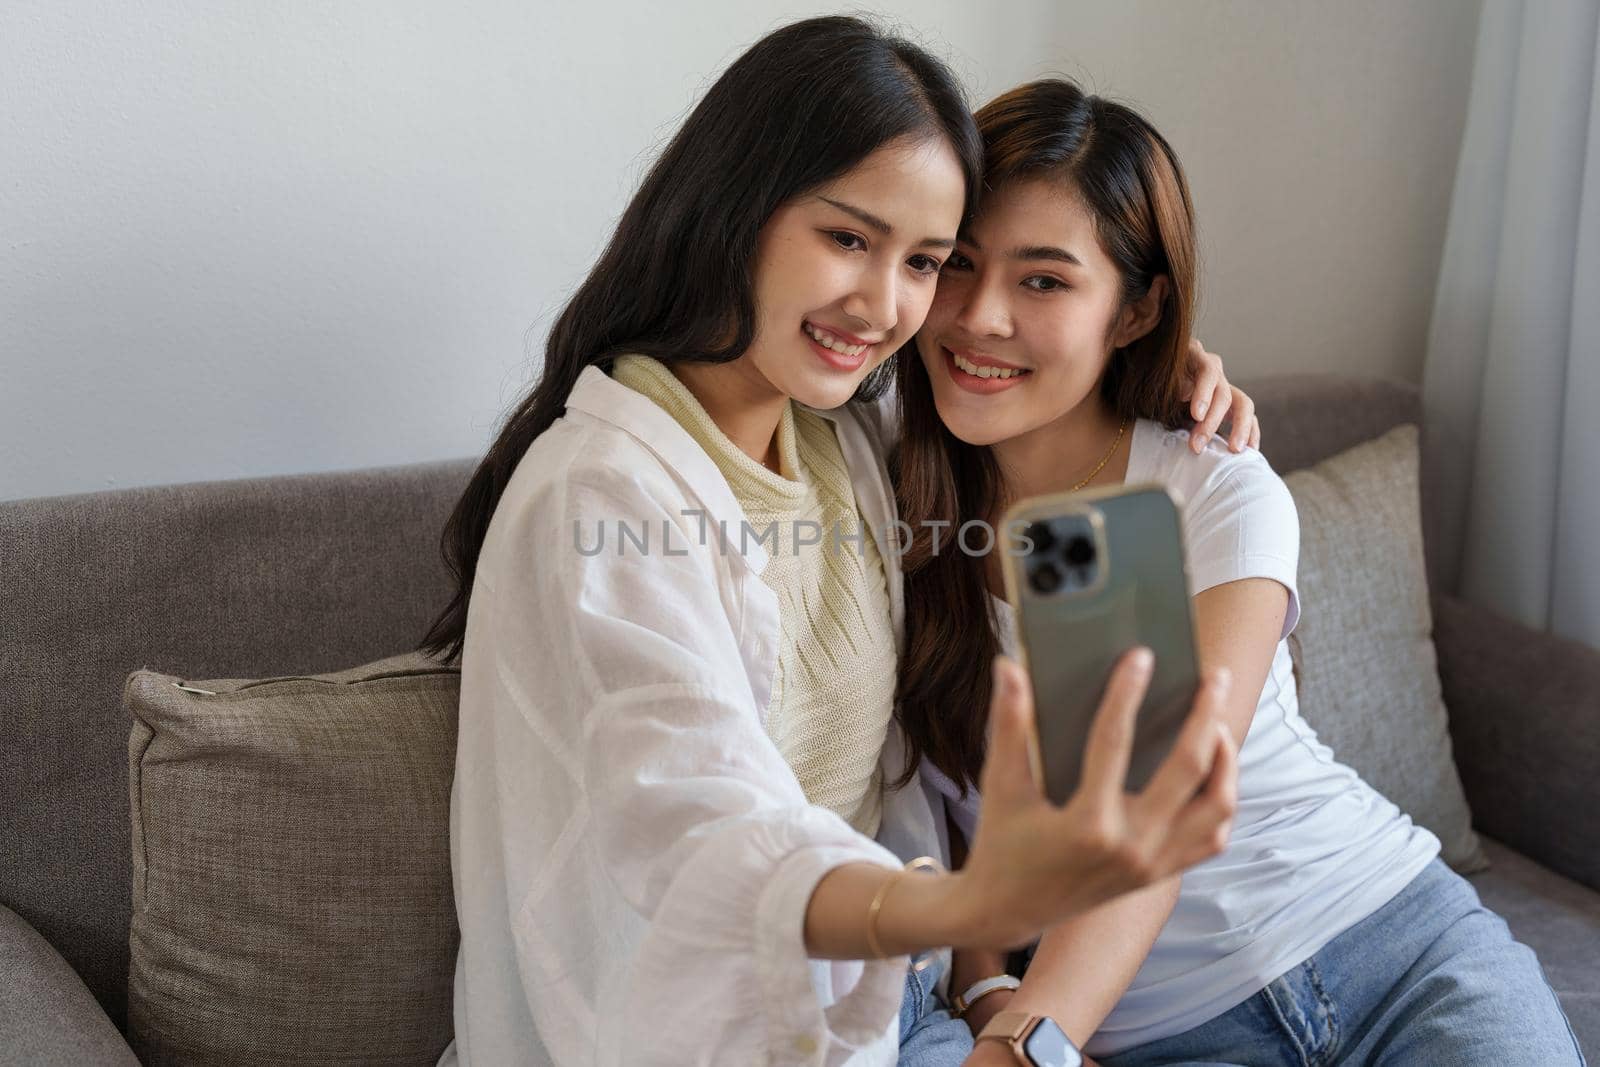 lgbtq, lgbt concept, homosexuality, portrait of two asian women enjoying together and showing love for each other while using smartphone mobile to take selfies.